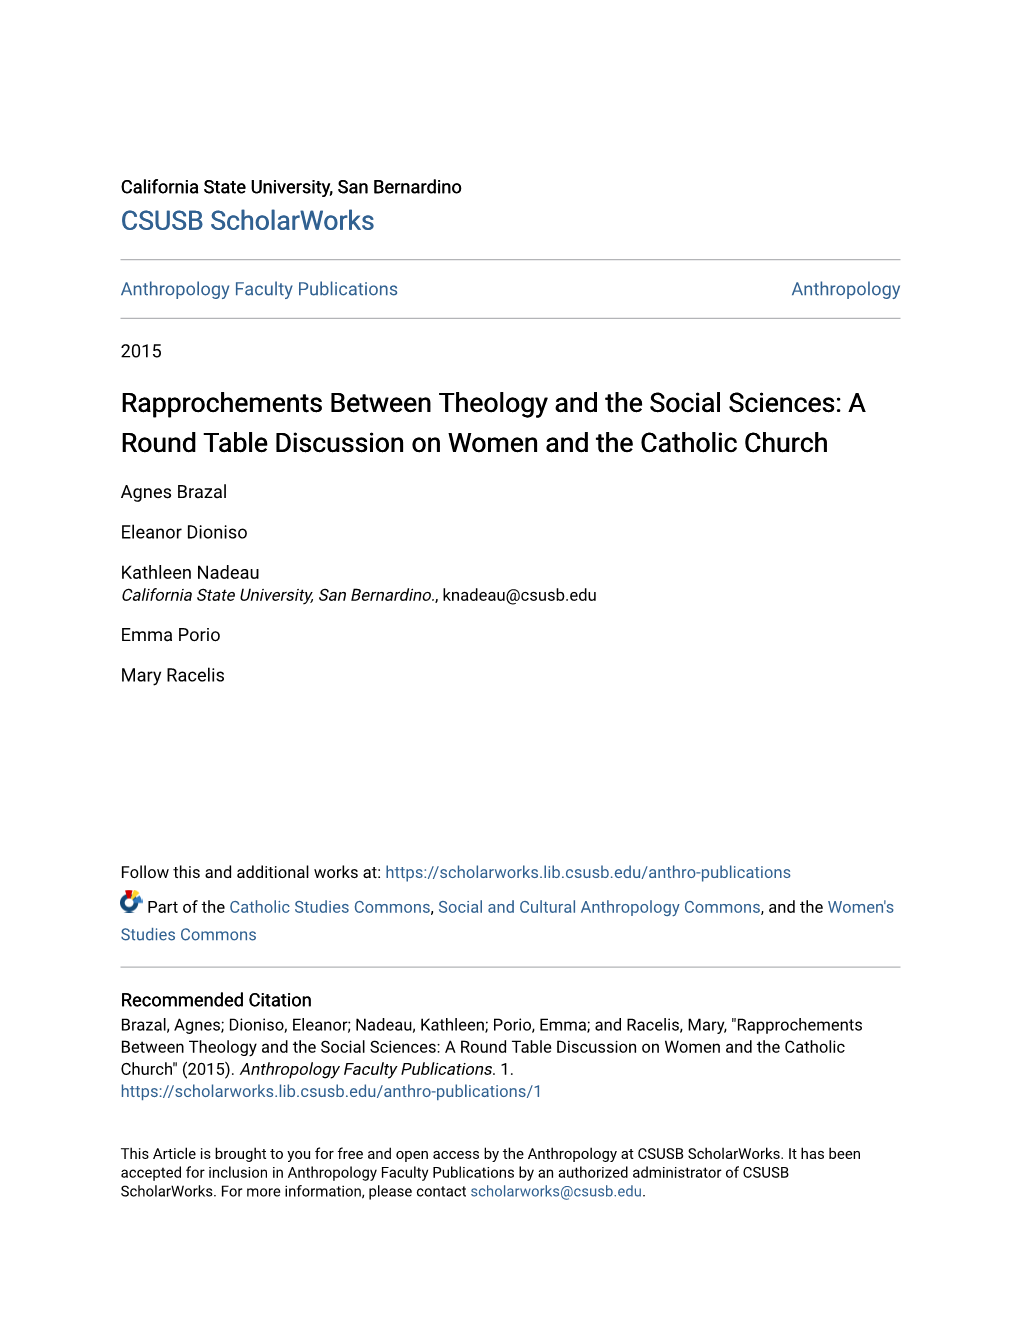 Rapprochements Between Theology and the Social Sciences: a Round Table Discussion on Women and the Catholic Church